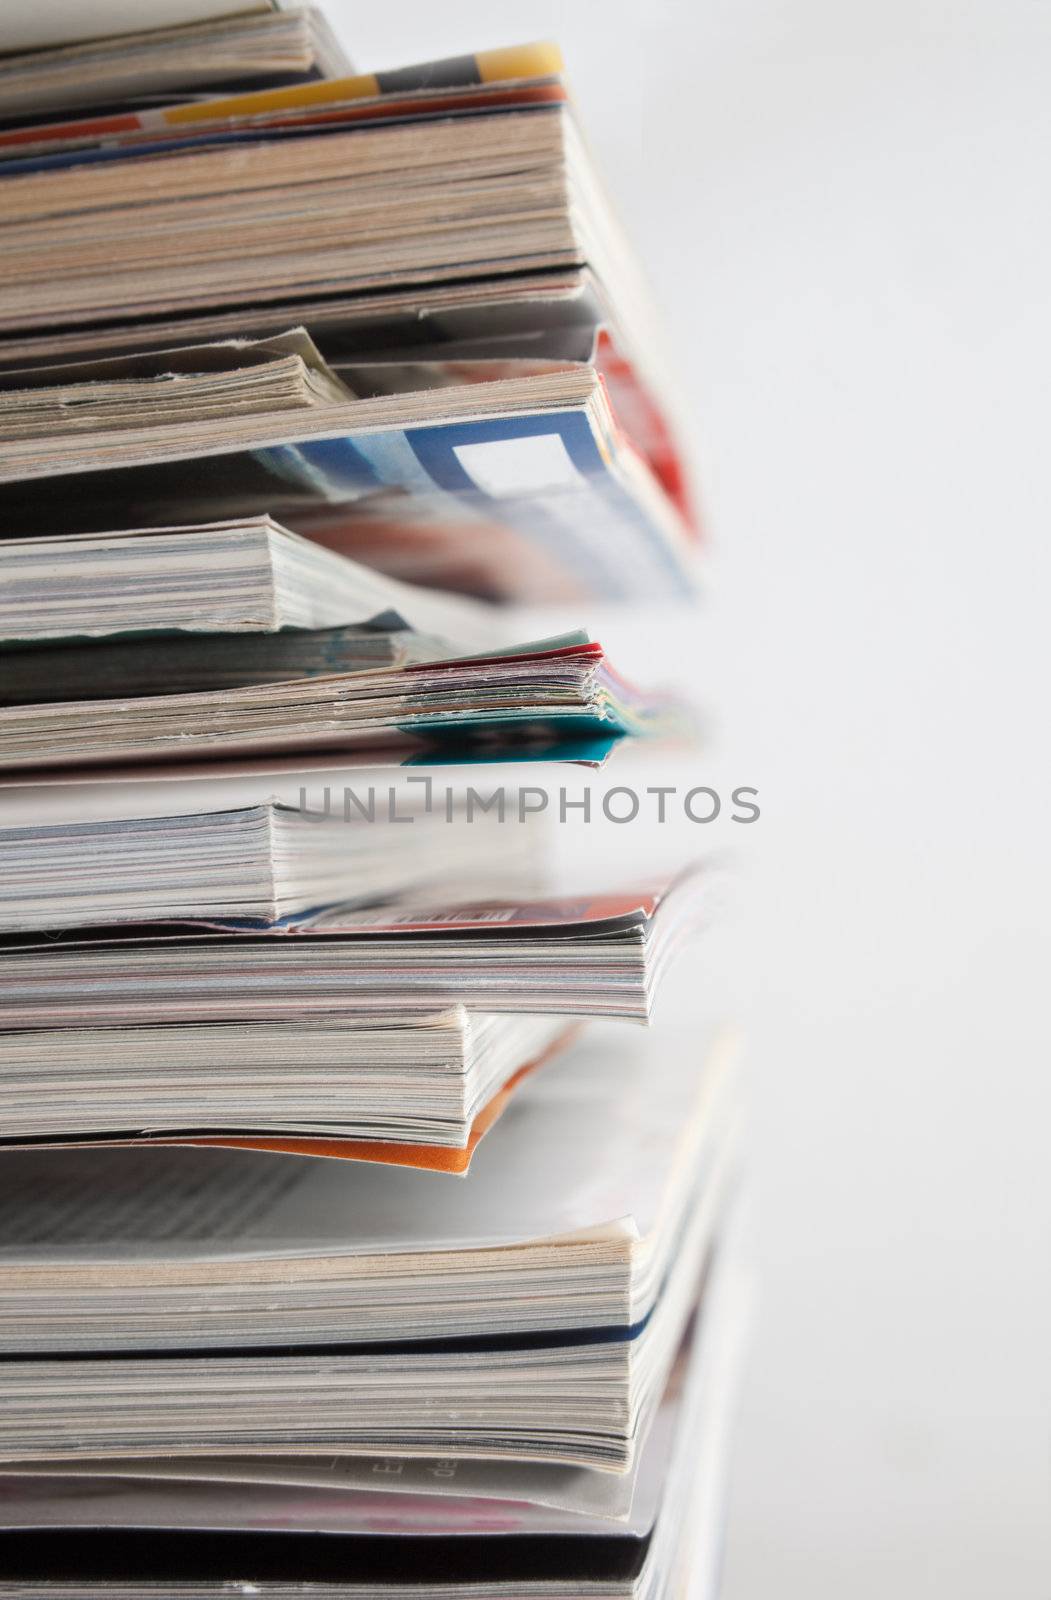 Close up image of several magazines and books